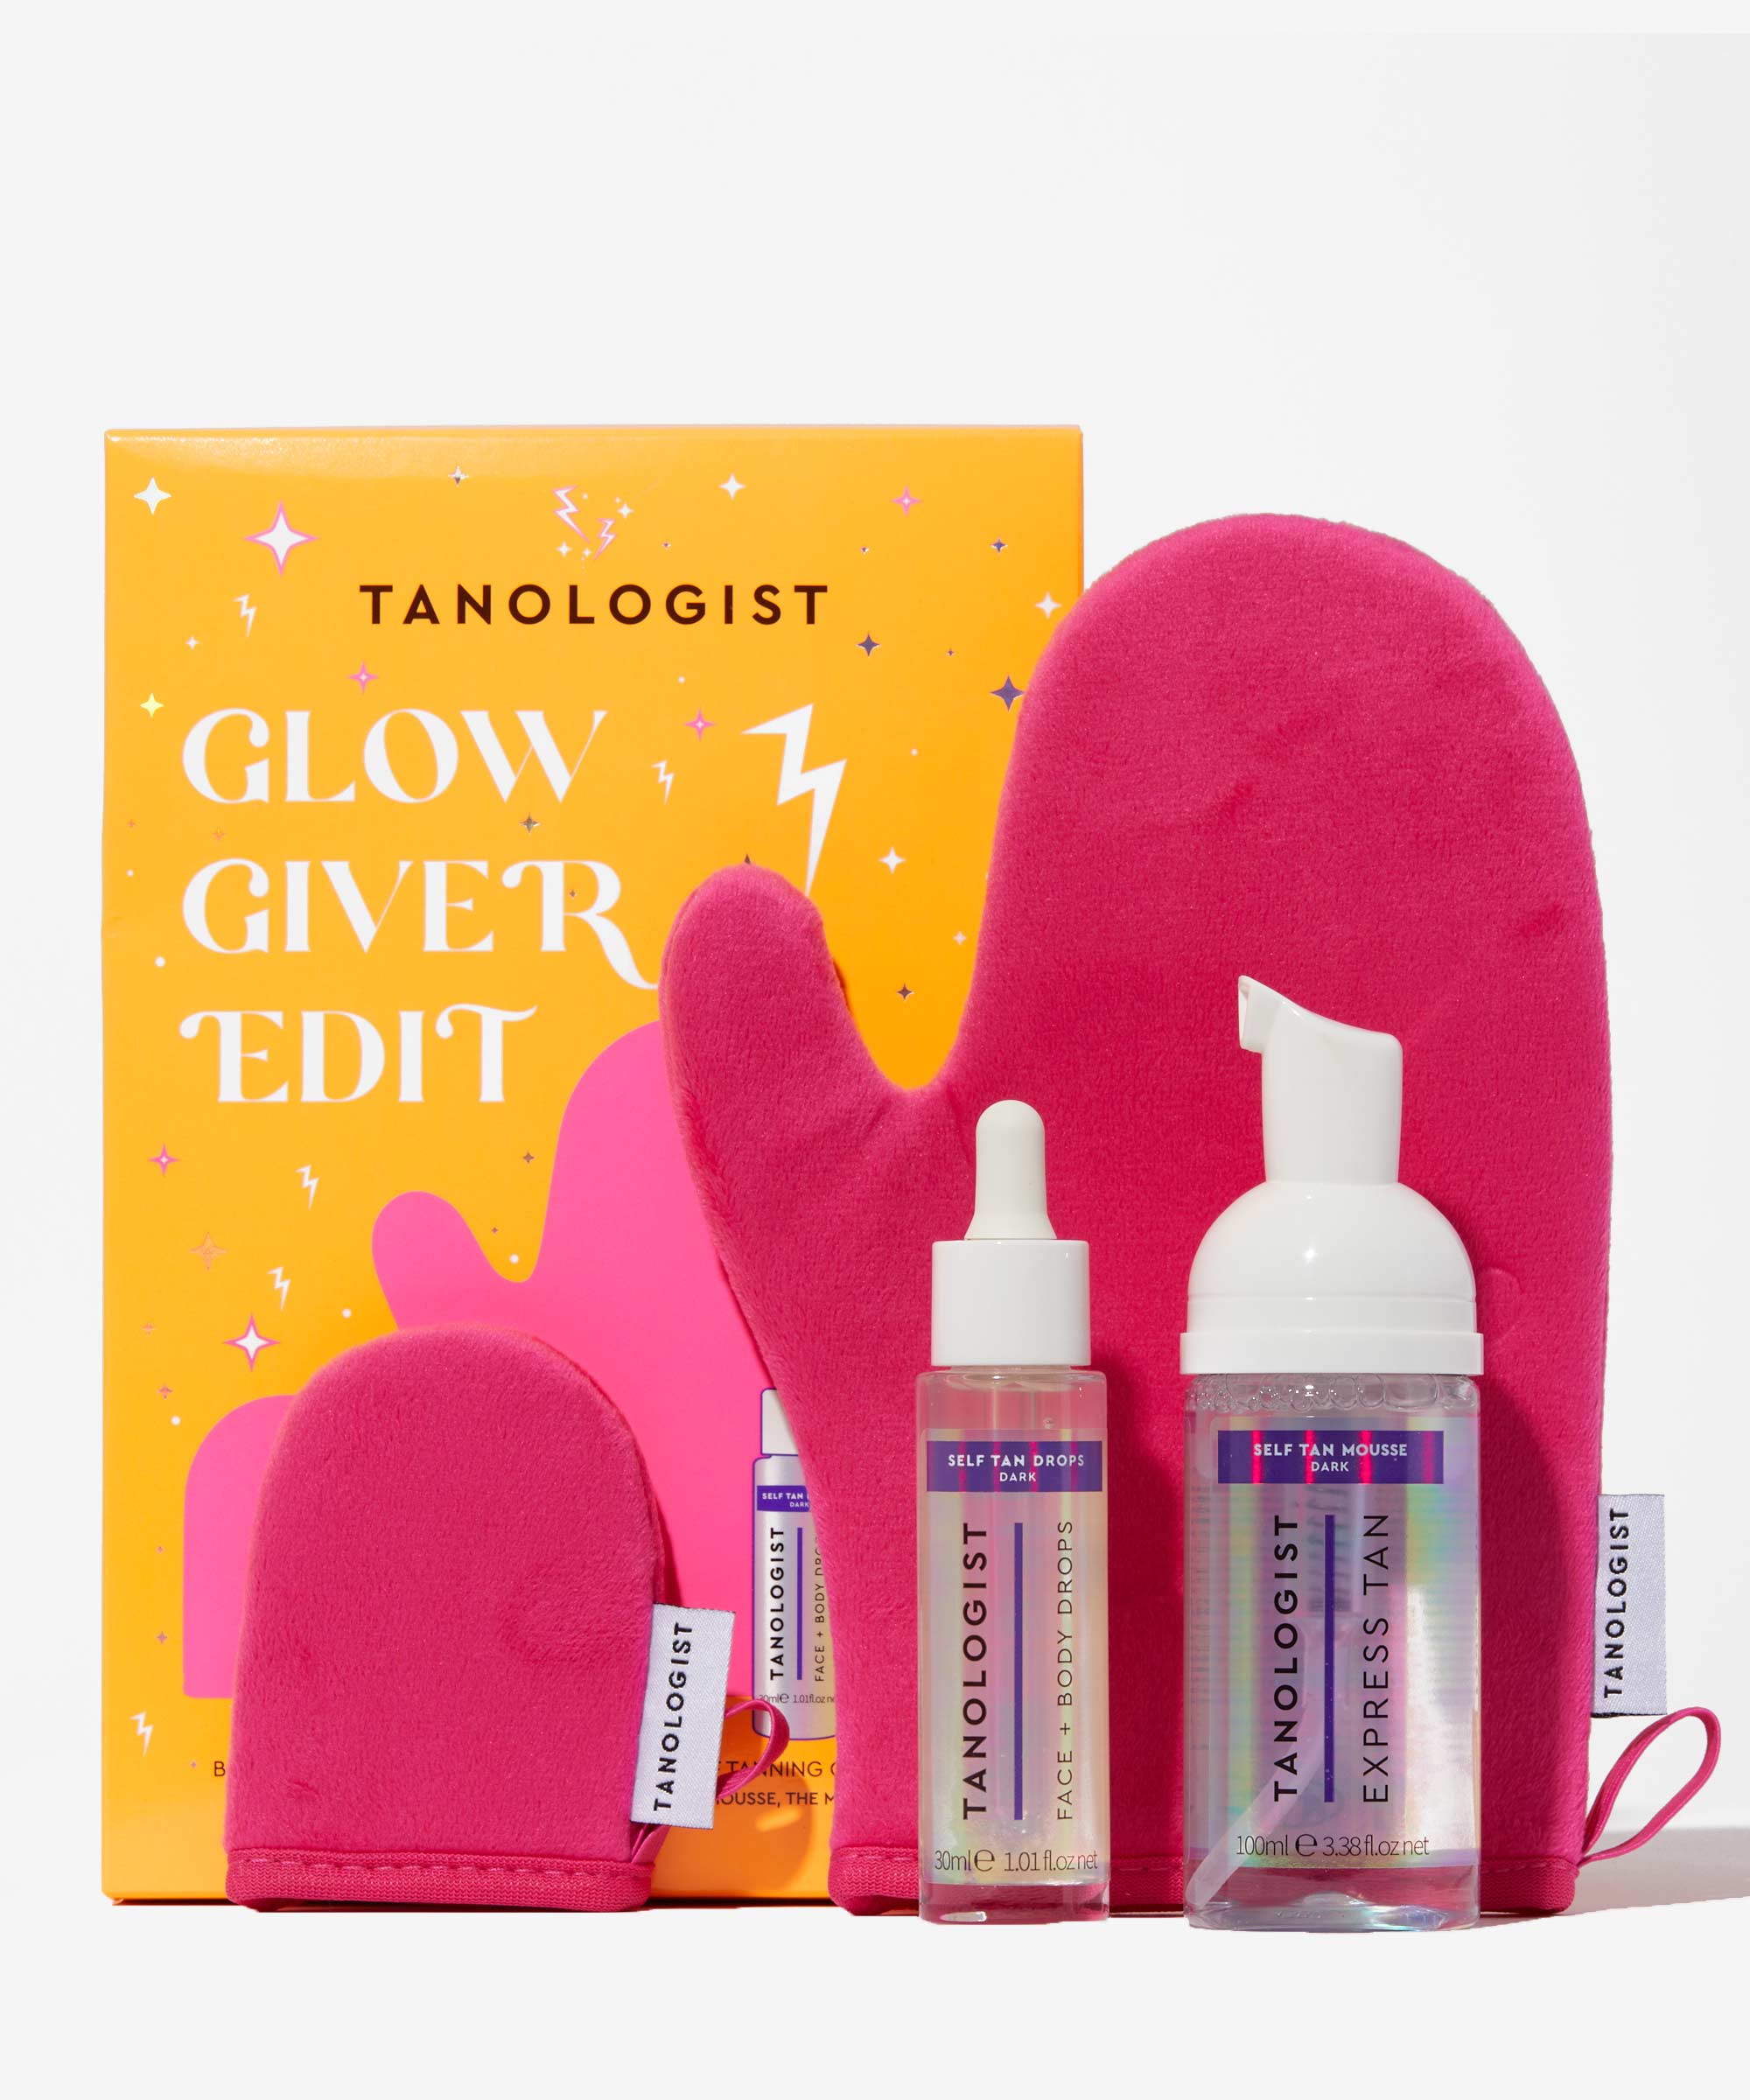 Tanologist Glow Giver Edit At Beauty Bay